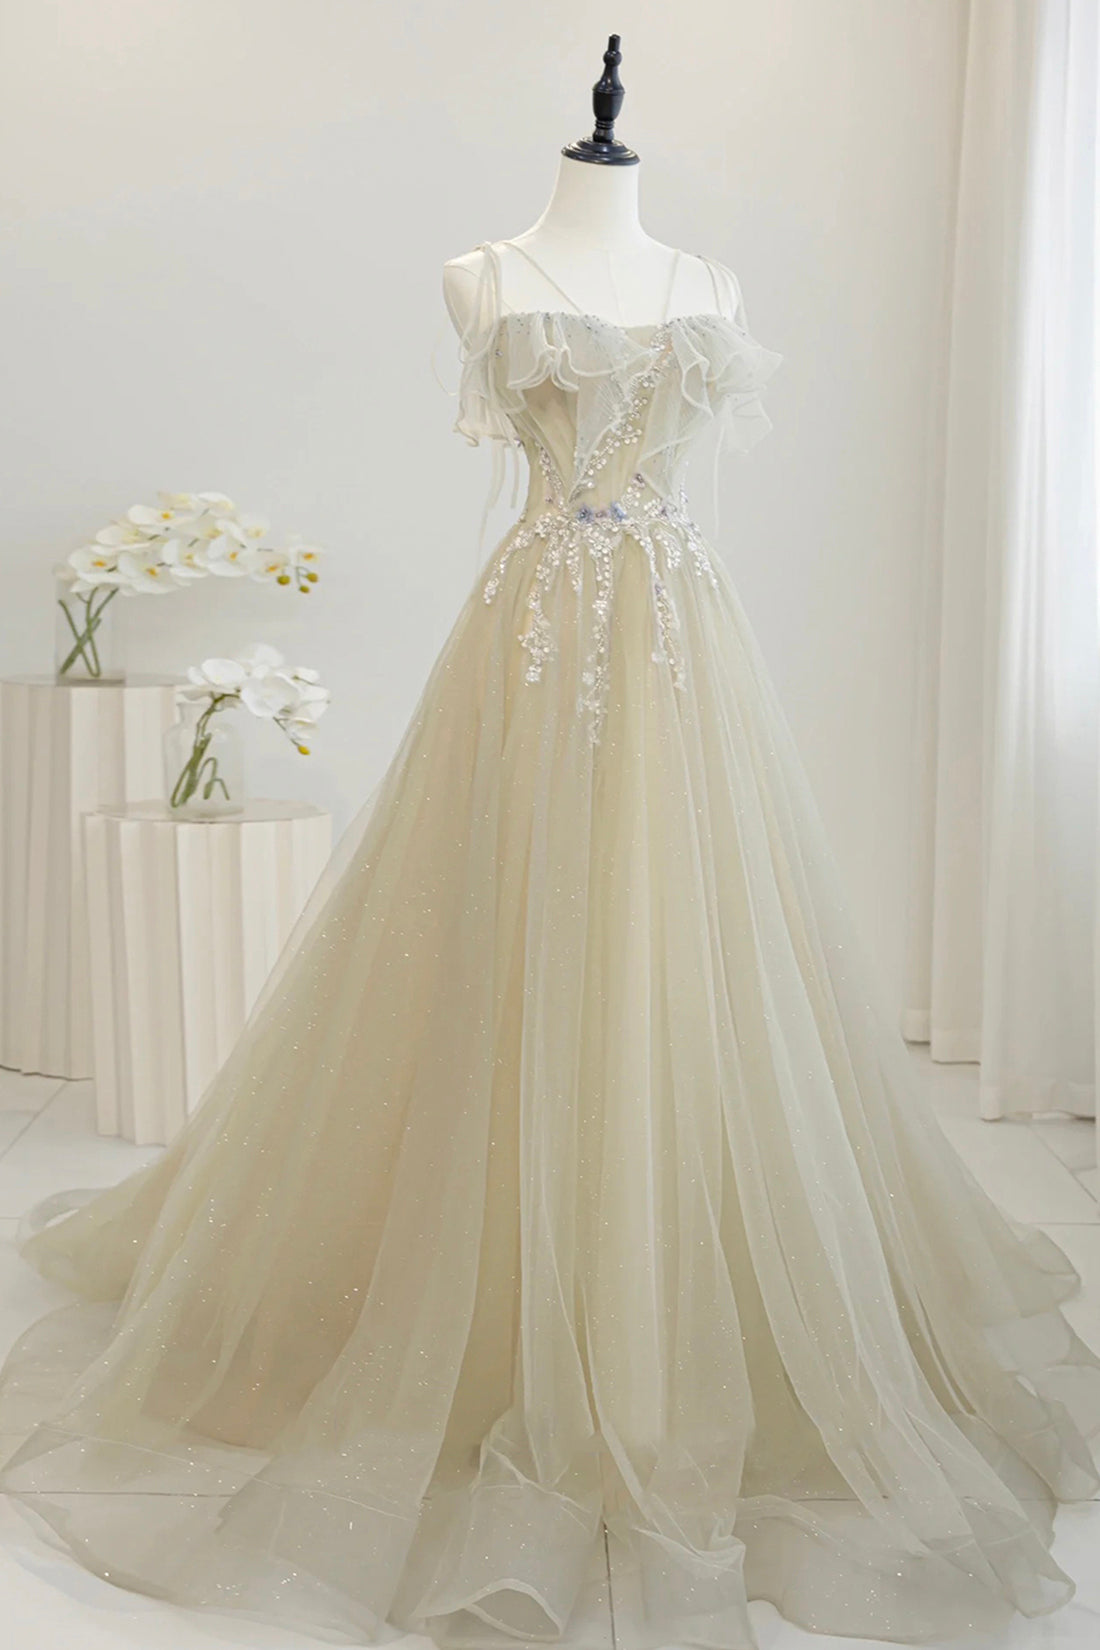 A-Line Spaghetti Strap Tulle Floor Length Prom Dress, Beautiful Light Green Evening Party Dress